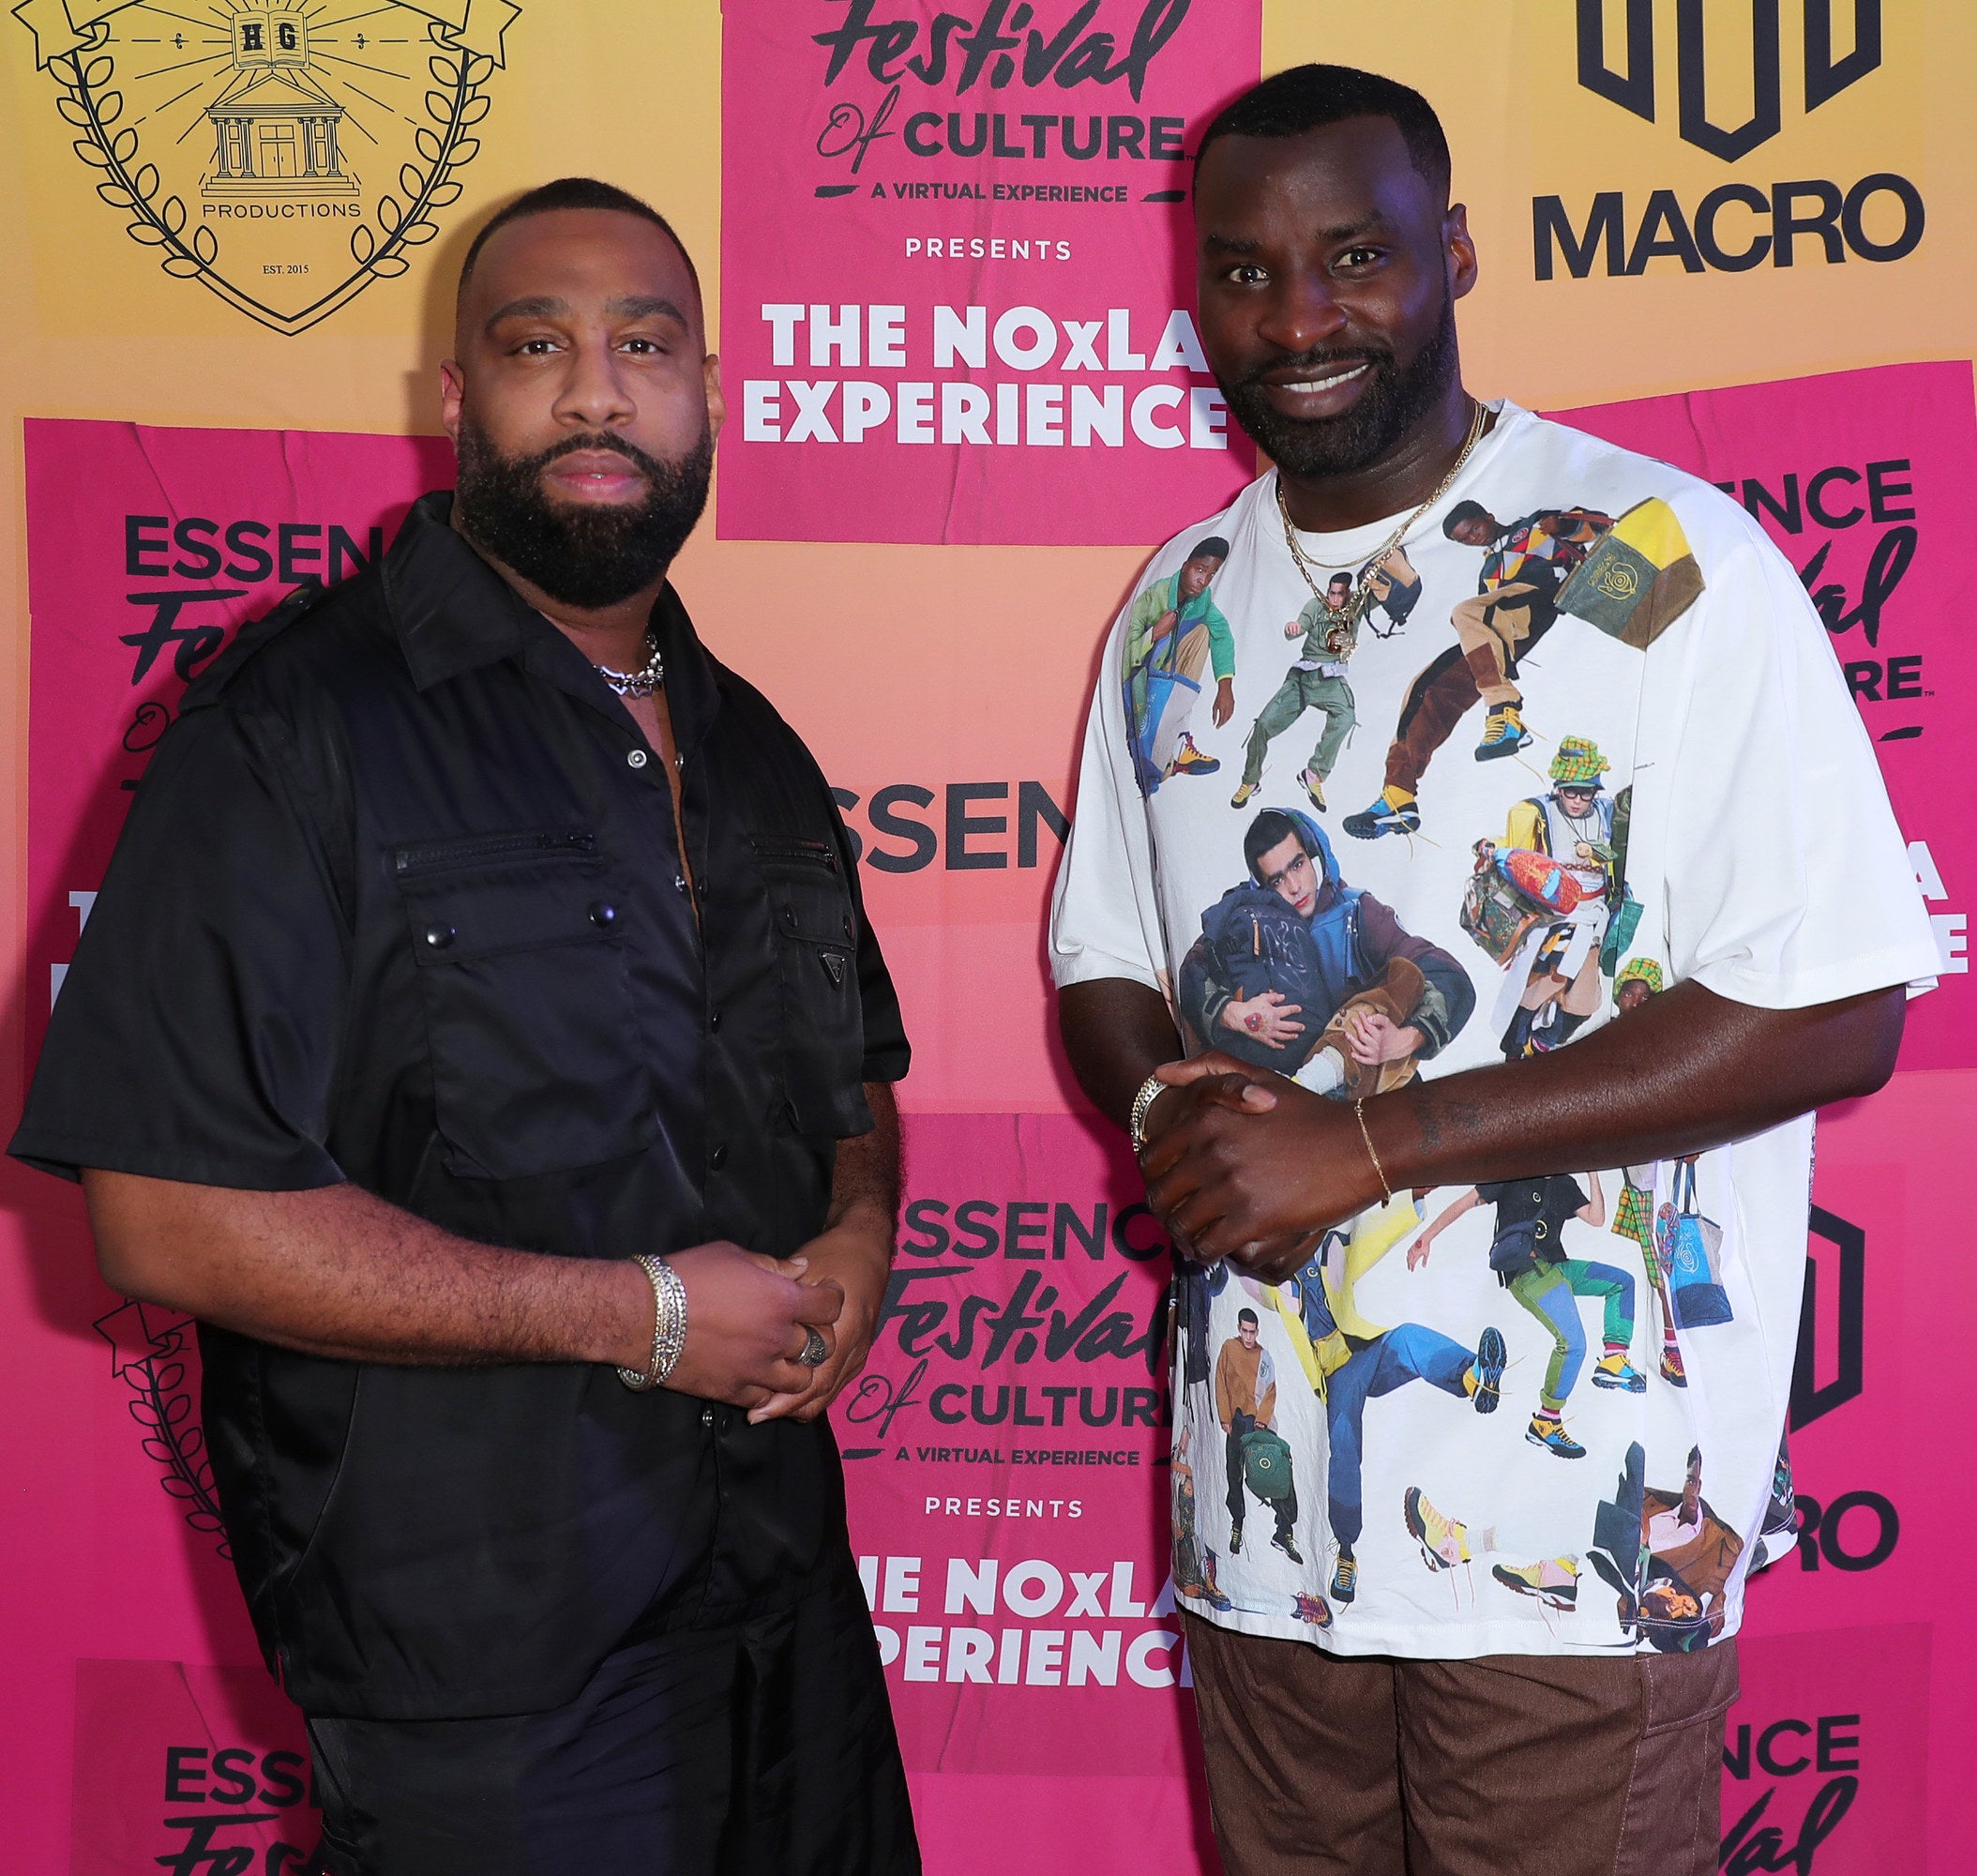 Micah McDonald and Wayman Bannerman attend the ESSENCE/Hillman Grad/Macro NOxLA Experience Watch Party Soiree in honor of the first weekend of the virtual 2021 ESSENCE Festival of Culture